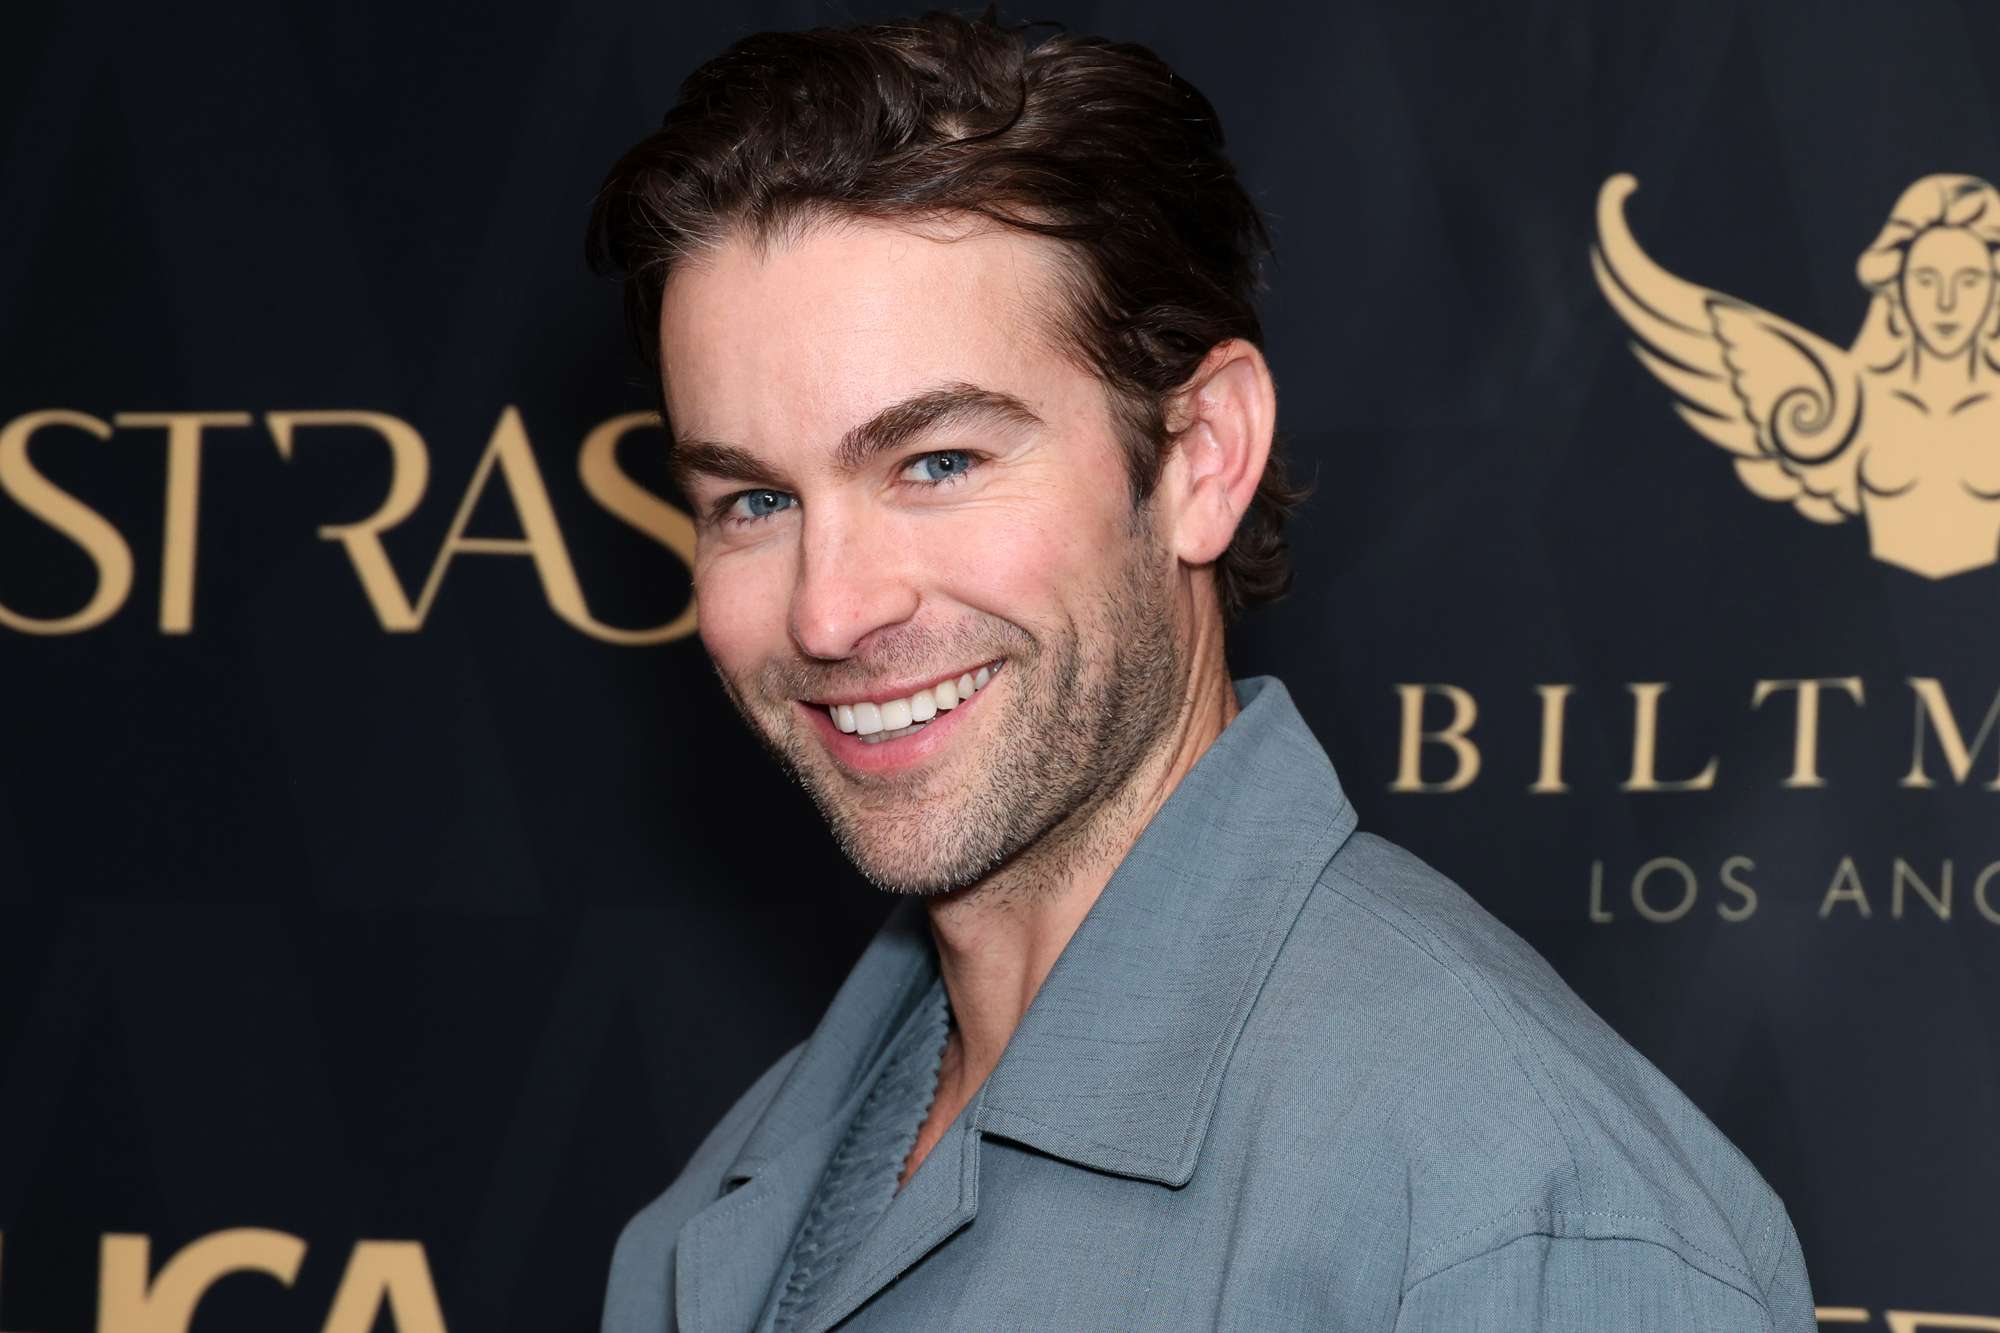 Chace Crawford Keeps a Healthy Diet 'but on the Weekends, Anything Goes': 'I’ll Still Throw It to a Big Mac'